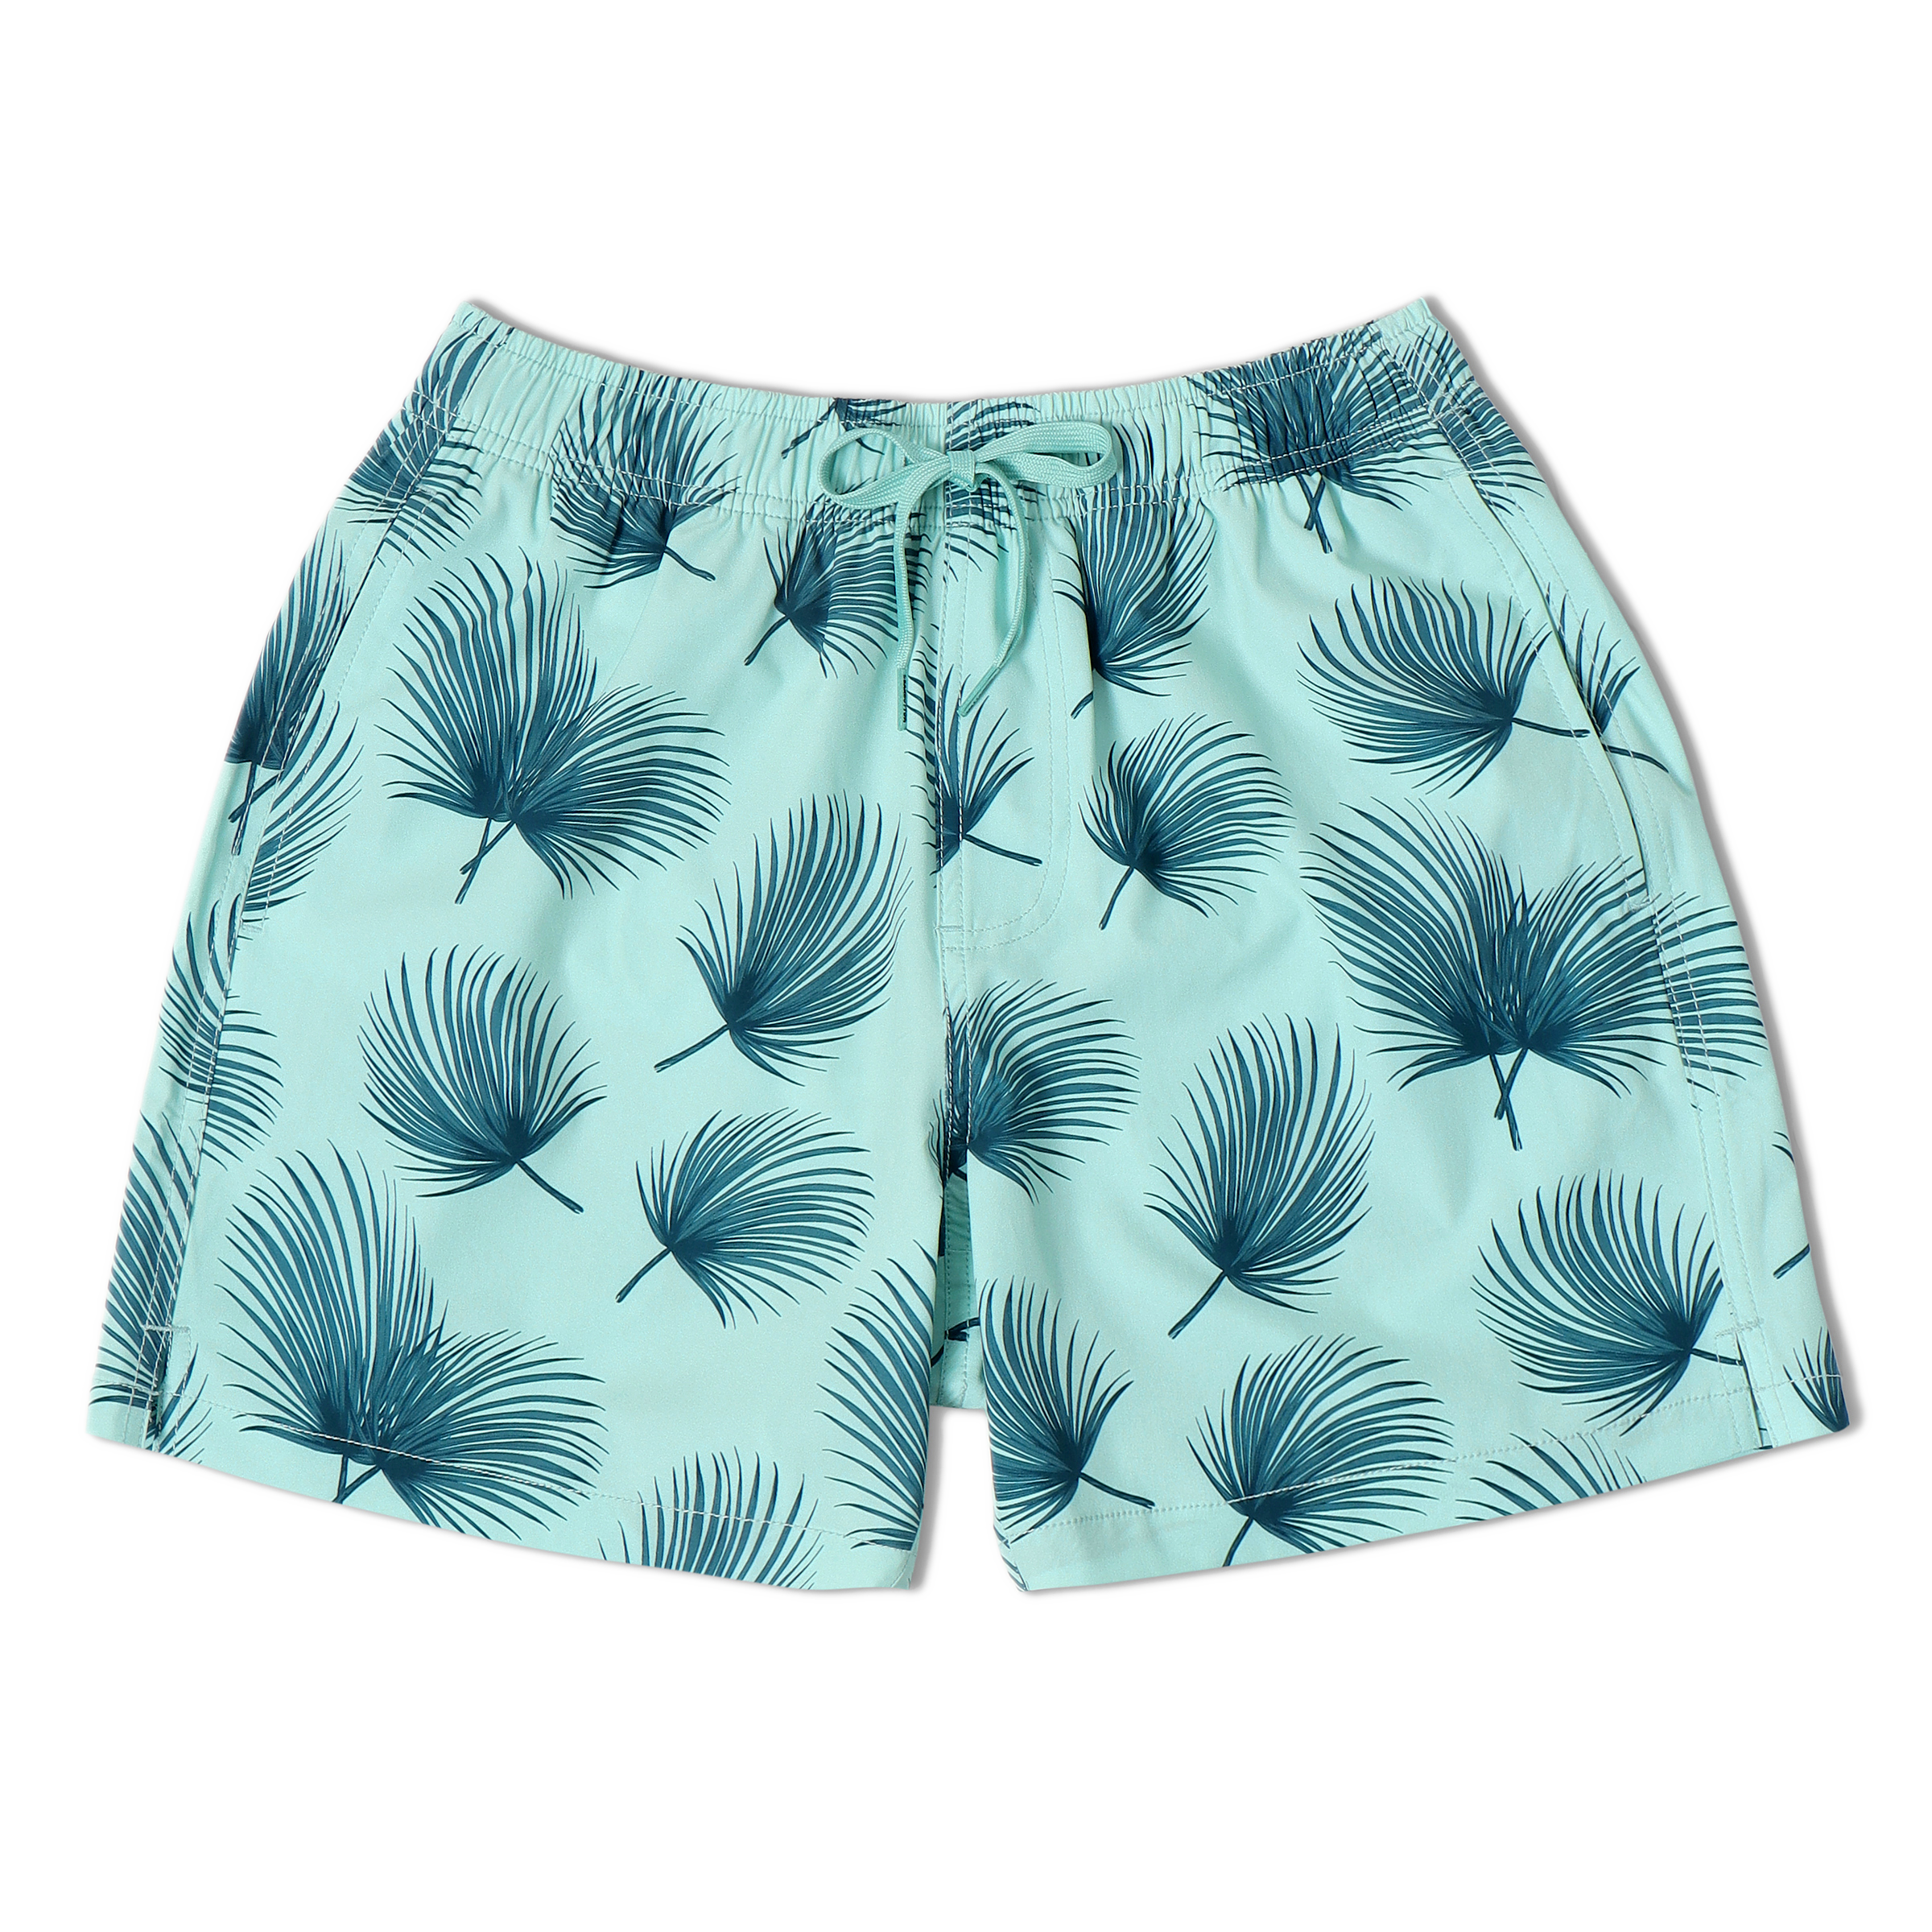 Stretch Swim 5.5" Island Shade front with an elastic waistband, two inseam pockets, and a dyed-to-match drawstring